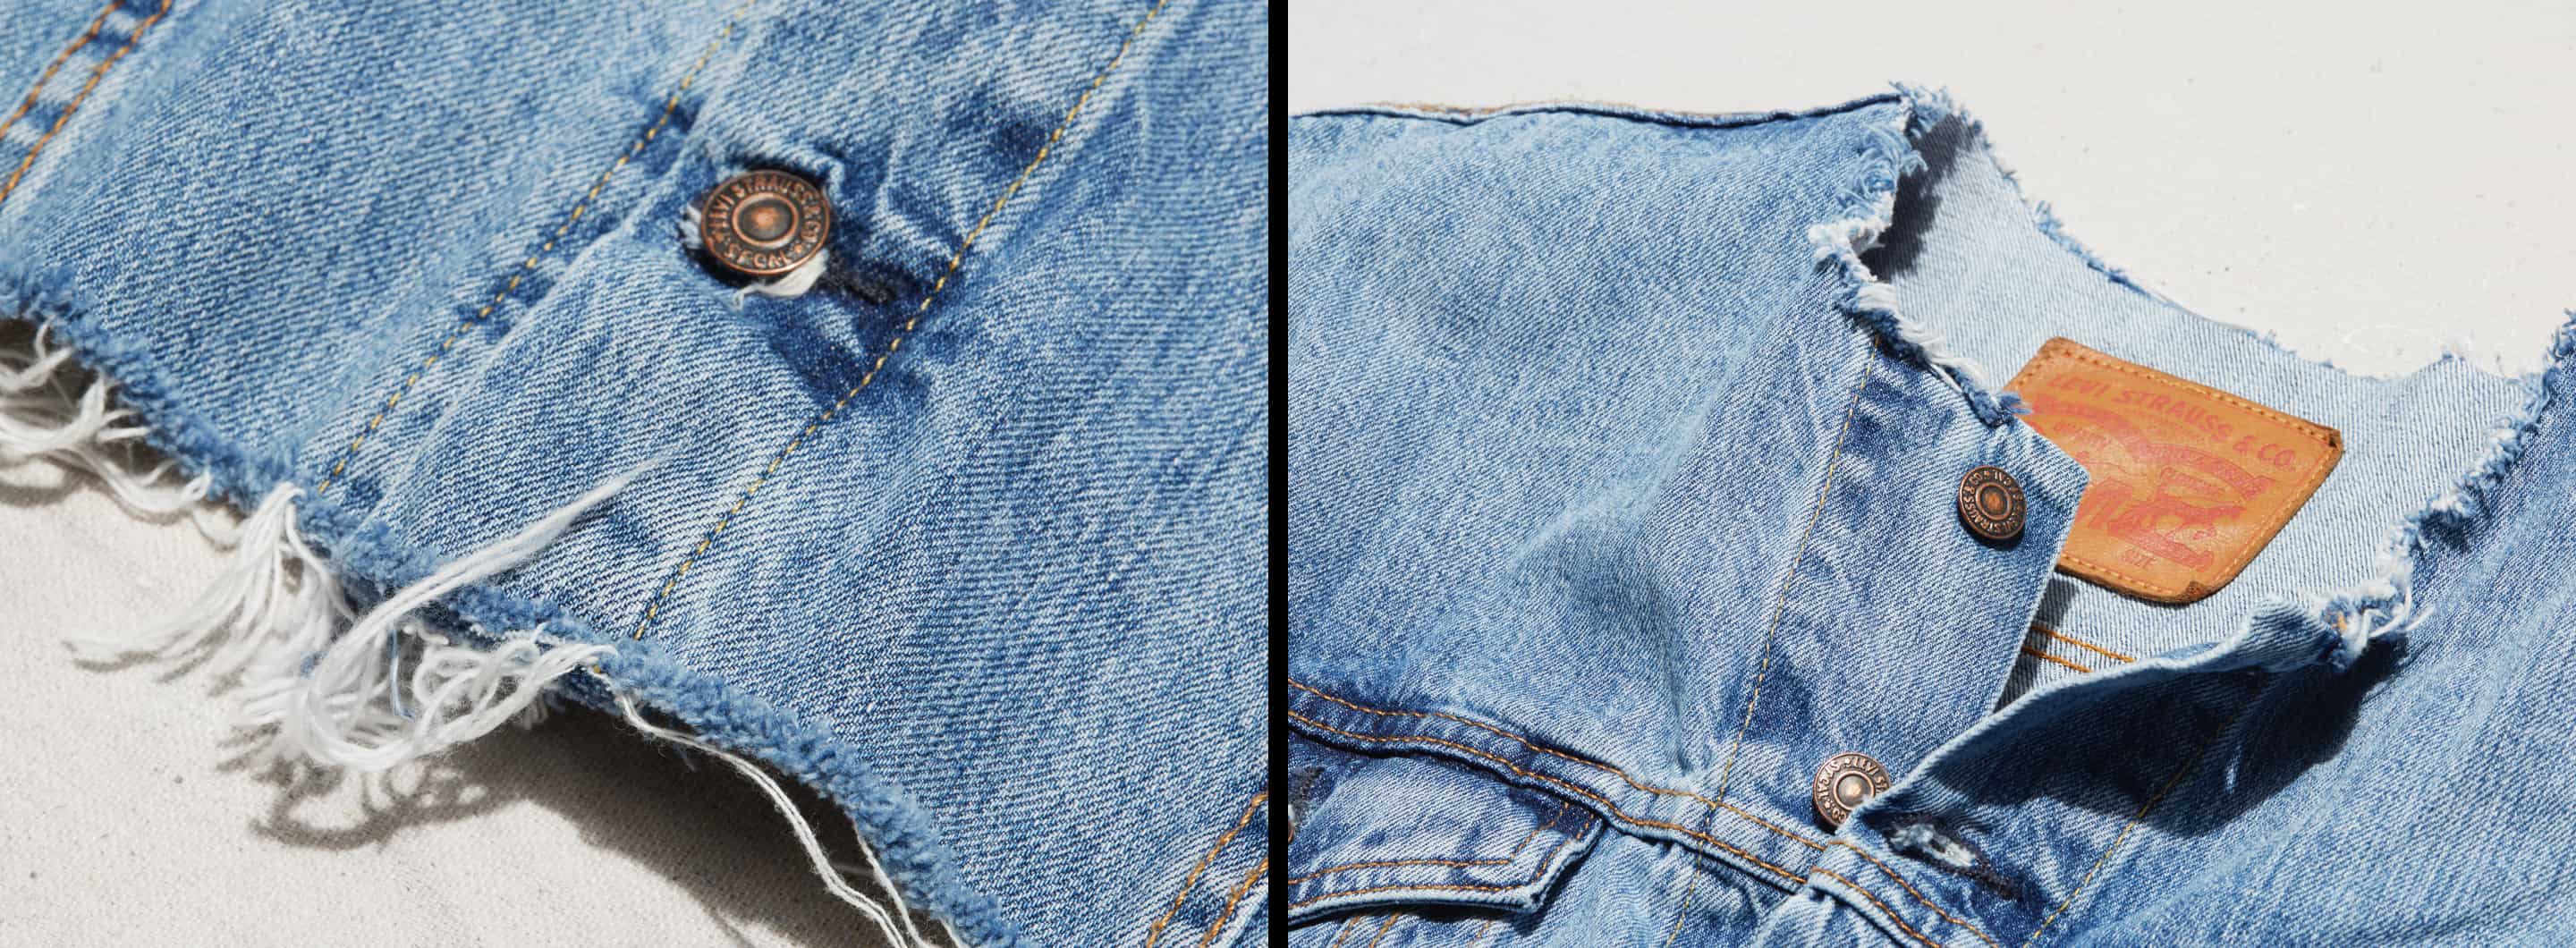 15 Best DIY Denim Jacket Projects to Try